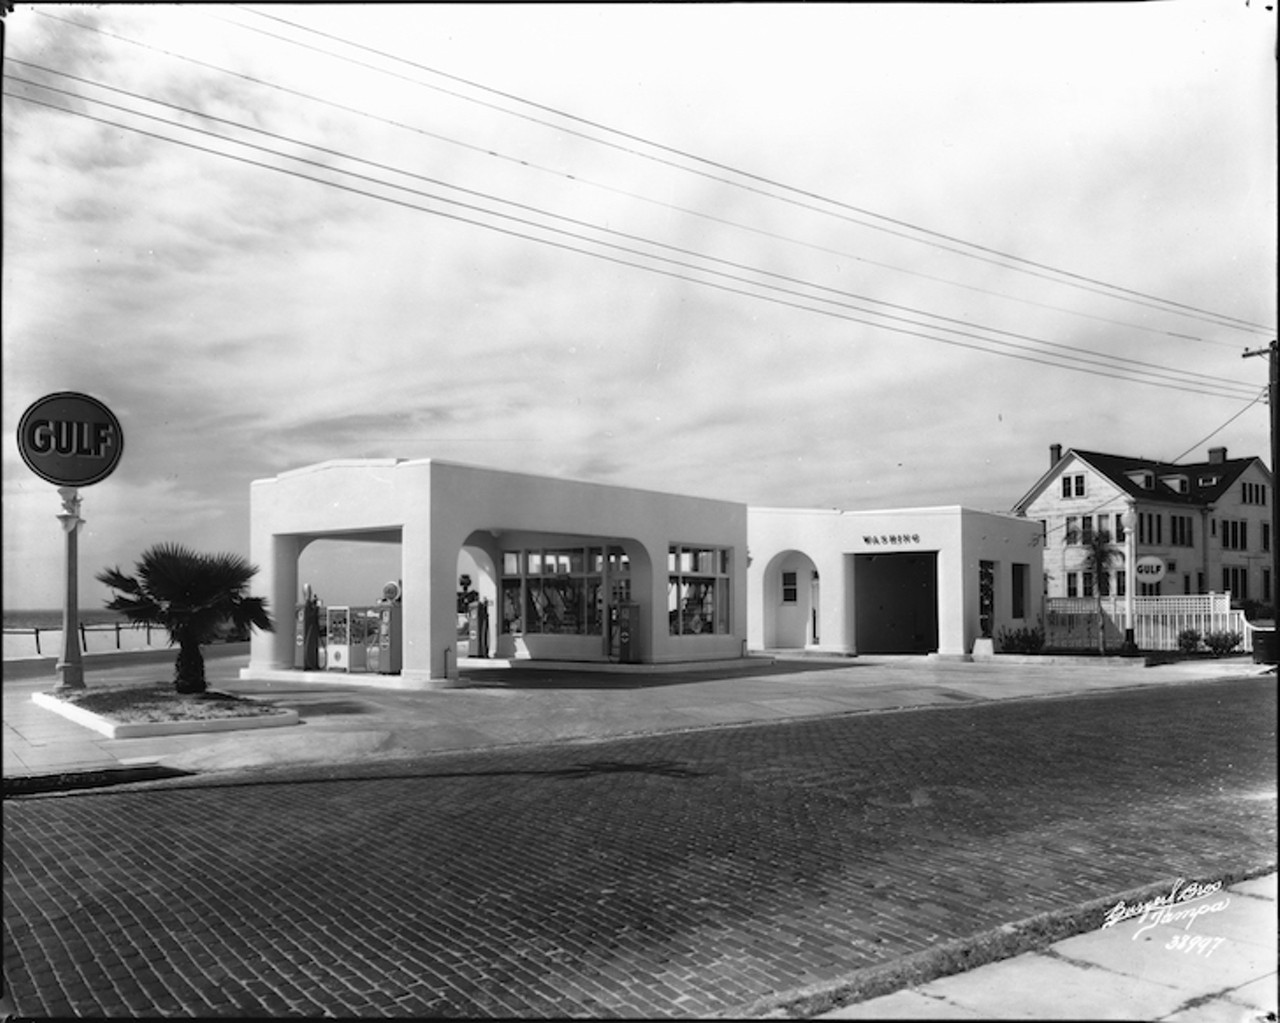 THEN
Gulf service station
Bayshore Boulevard and Swann Avenue, 1936
Gulf Oil Corporation of Pennsylvania service station was at the intersection of Bayshore Boulevard and Swann Avenue. In the 1950&#146;s it was named Latimer&#146;s Gulf Service. It was a popular outlet being central to Hyde Park and Davis Islands. If one looks closely, a wooden fence and sand line Bayshore Boulevard where the Beaux-arts style balustrade-built in the late 1930s- now stands.